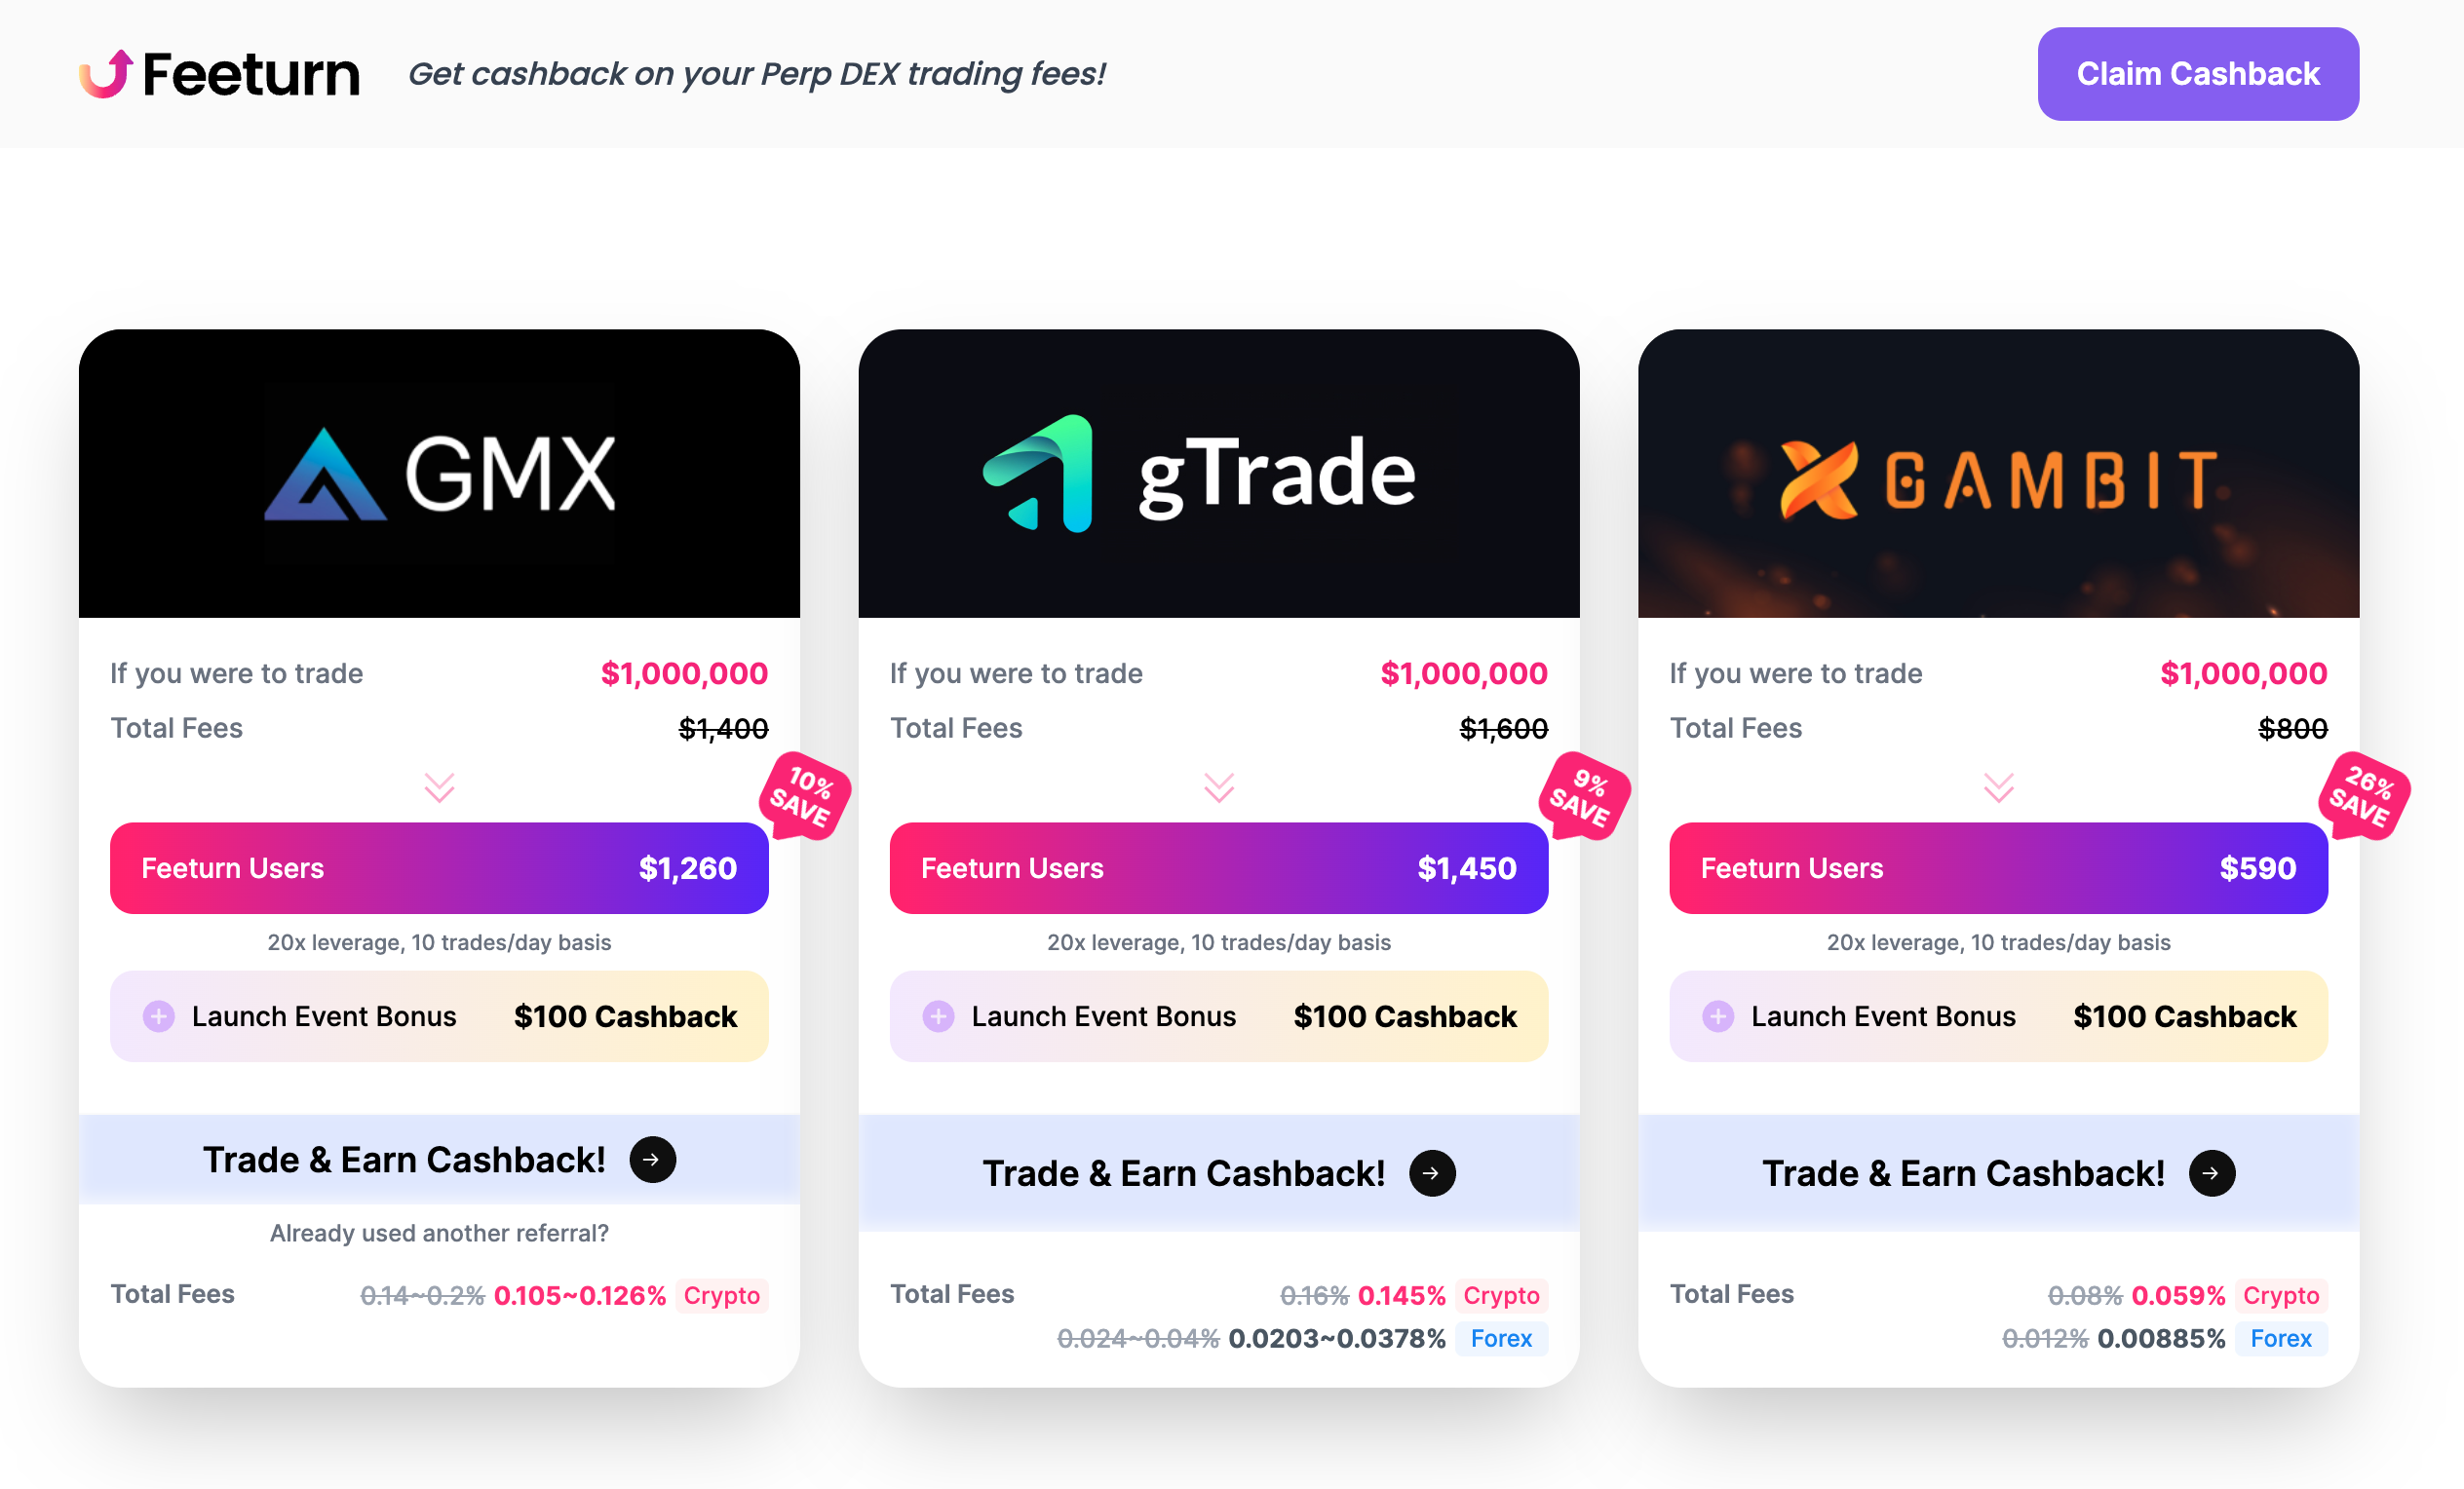 startuptile Feeturn-Get cashback on your Perp DEX trading fees